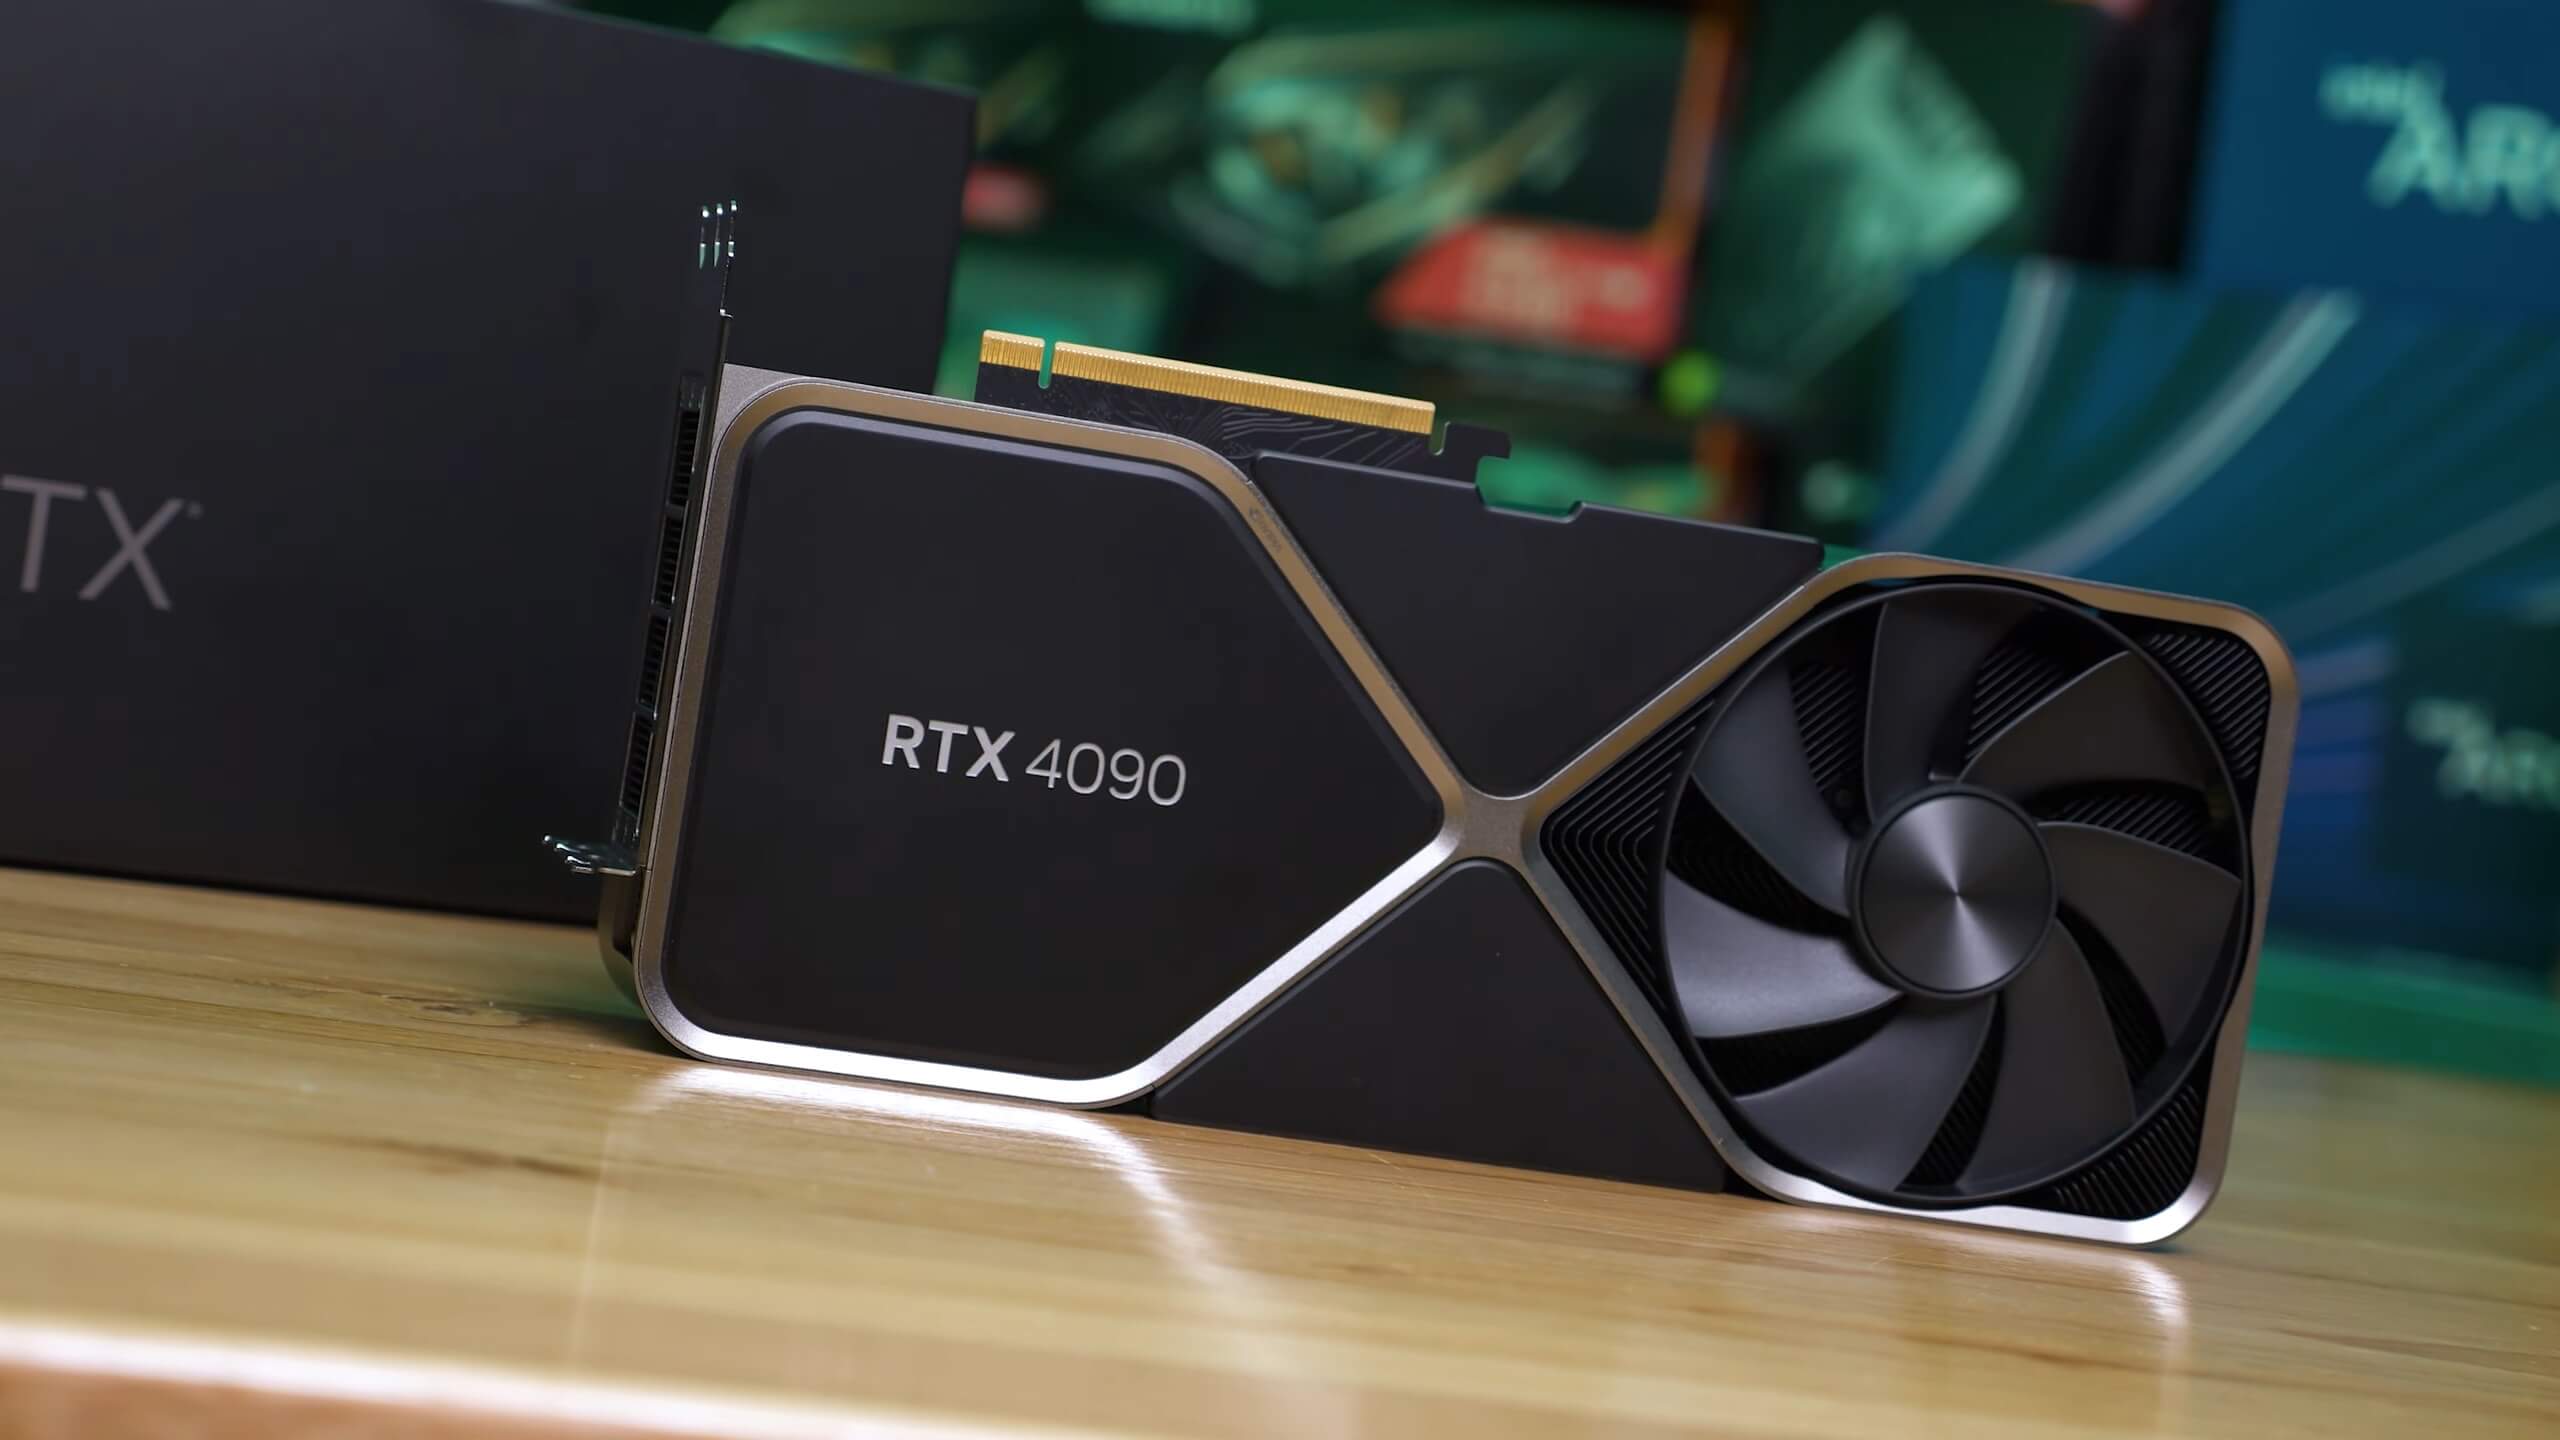 Buyer of $1,600 second-hand RTX 4090 finds it has no GPU, missing VRAM chips